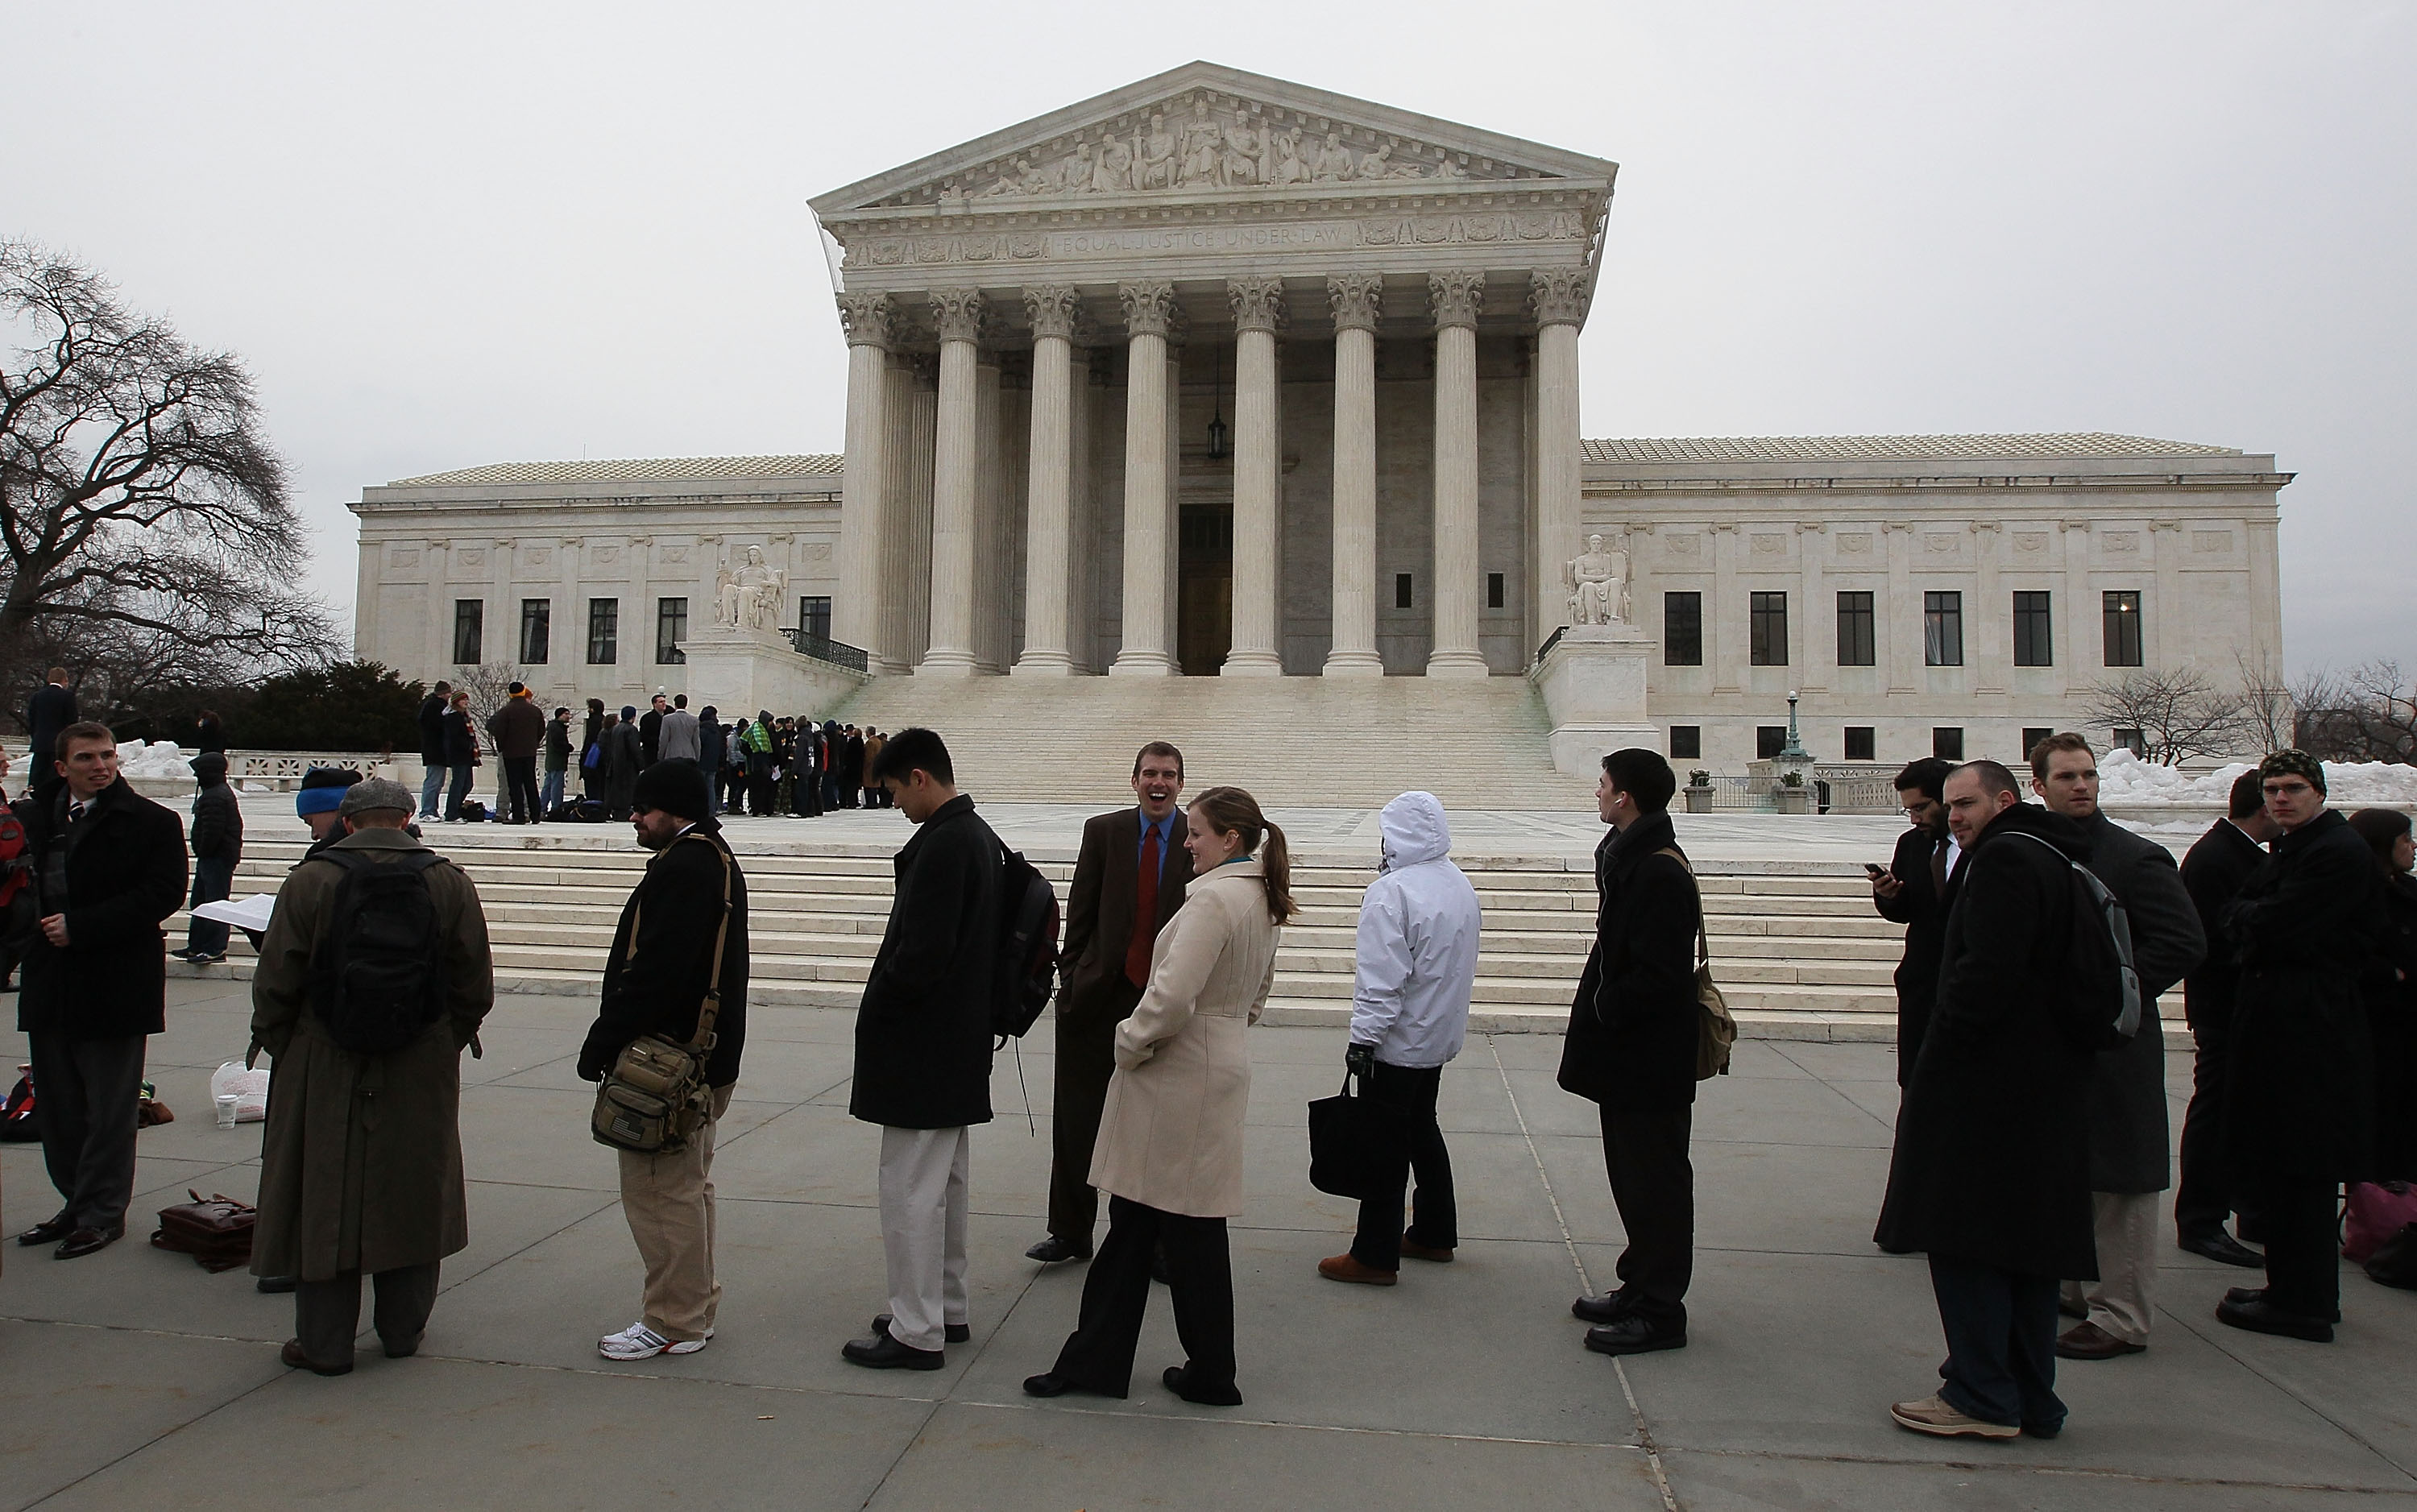 People wait in line to tour the U.S. Supreme Court Building on March 2, 2010 in Washington, DC. The high court heard arguments in the case of McDonald v the City of Chicago case that questions whether the Second Amendment is incorporated into the due process clause or the privileges or immunities clause of the fourteenth amendment, thus invalidating the city's handgun ban. (Mark Wilson/Getty Images)